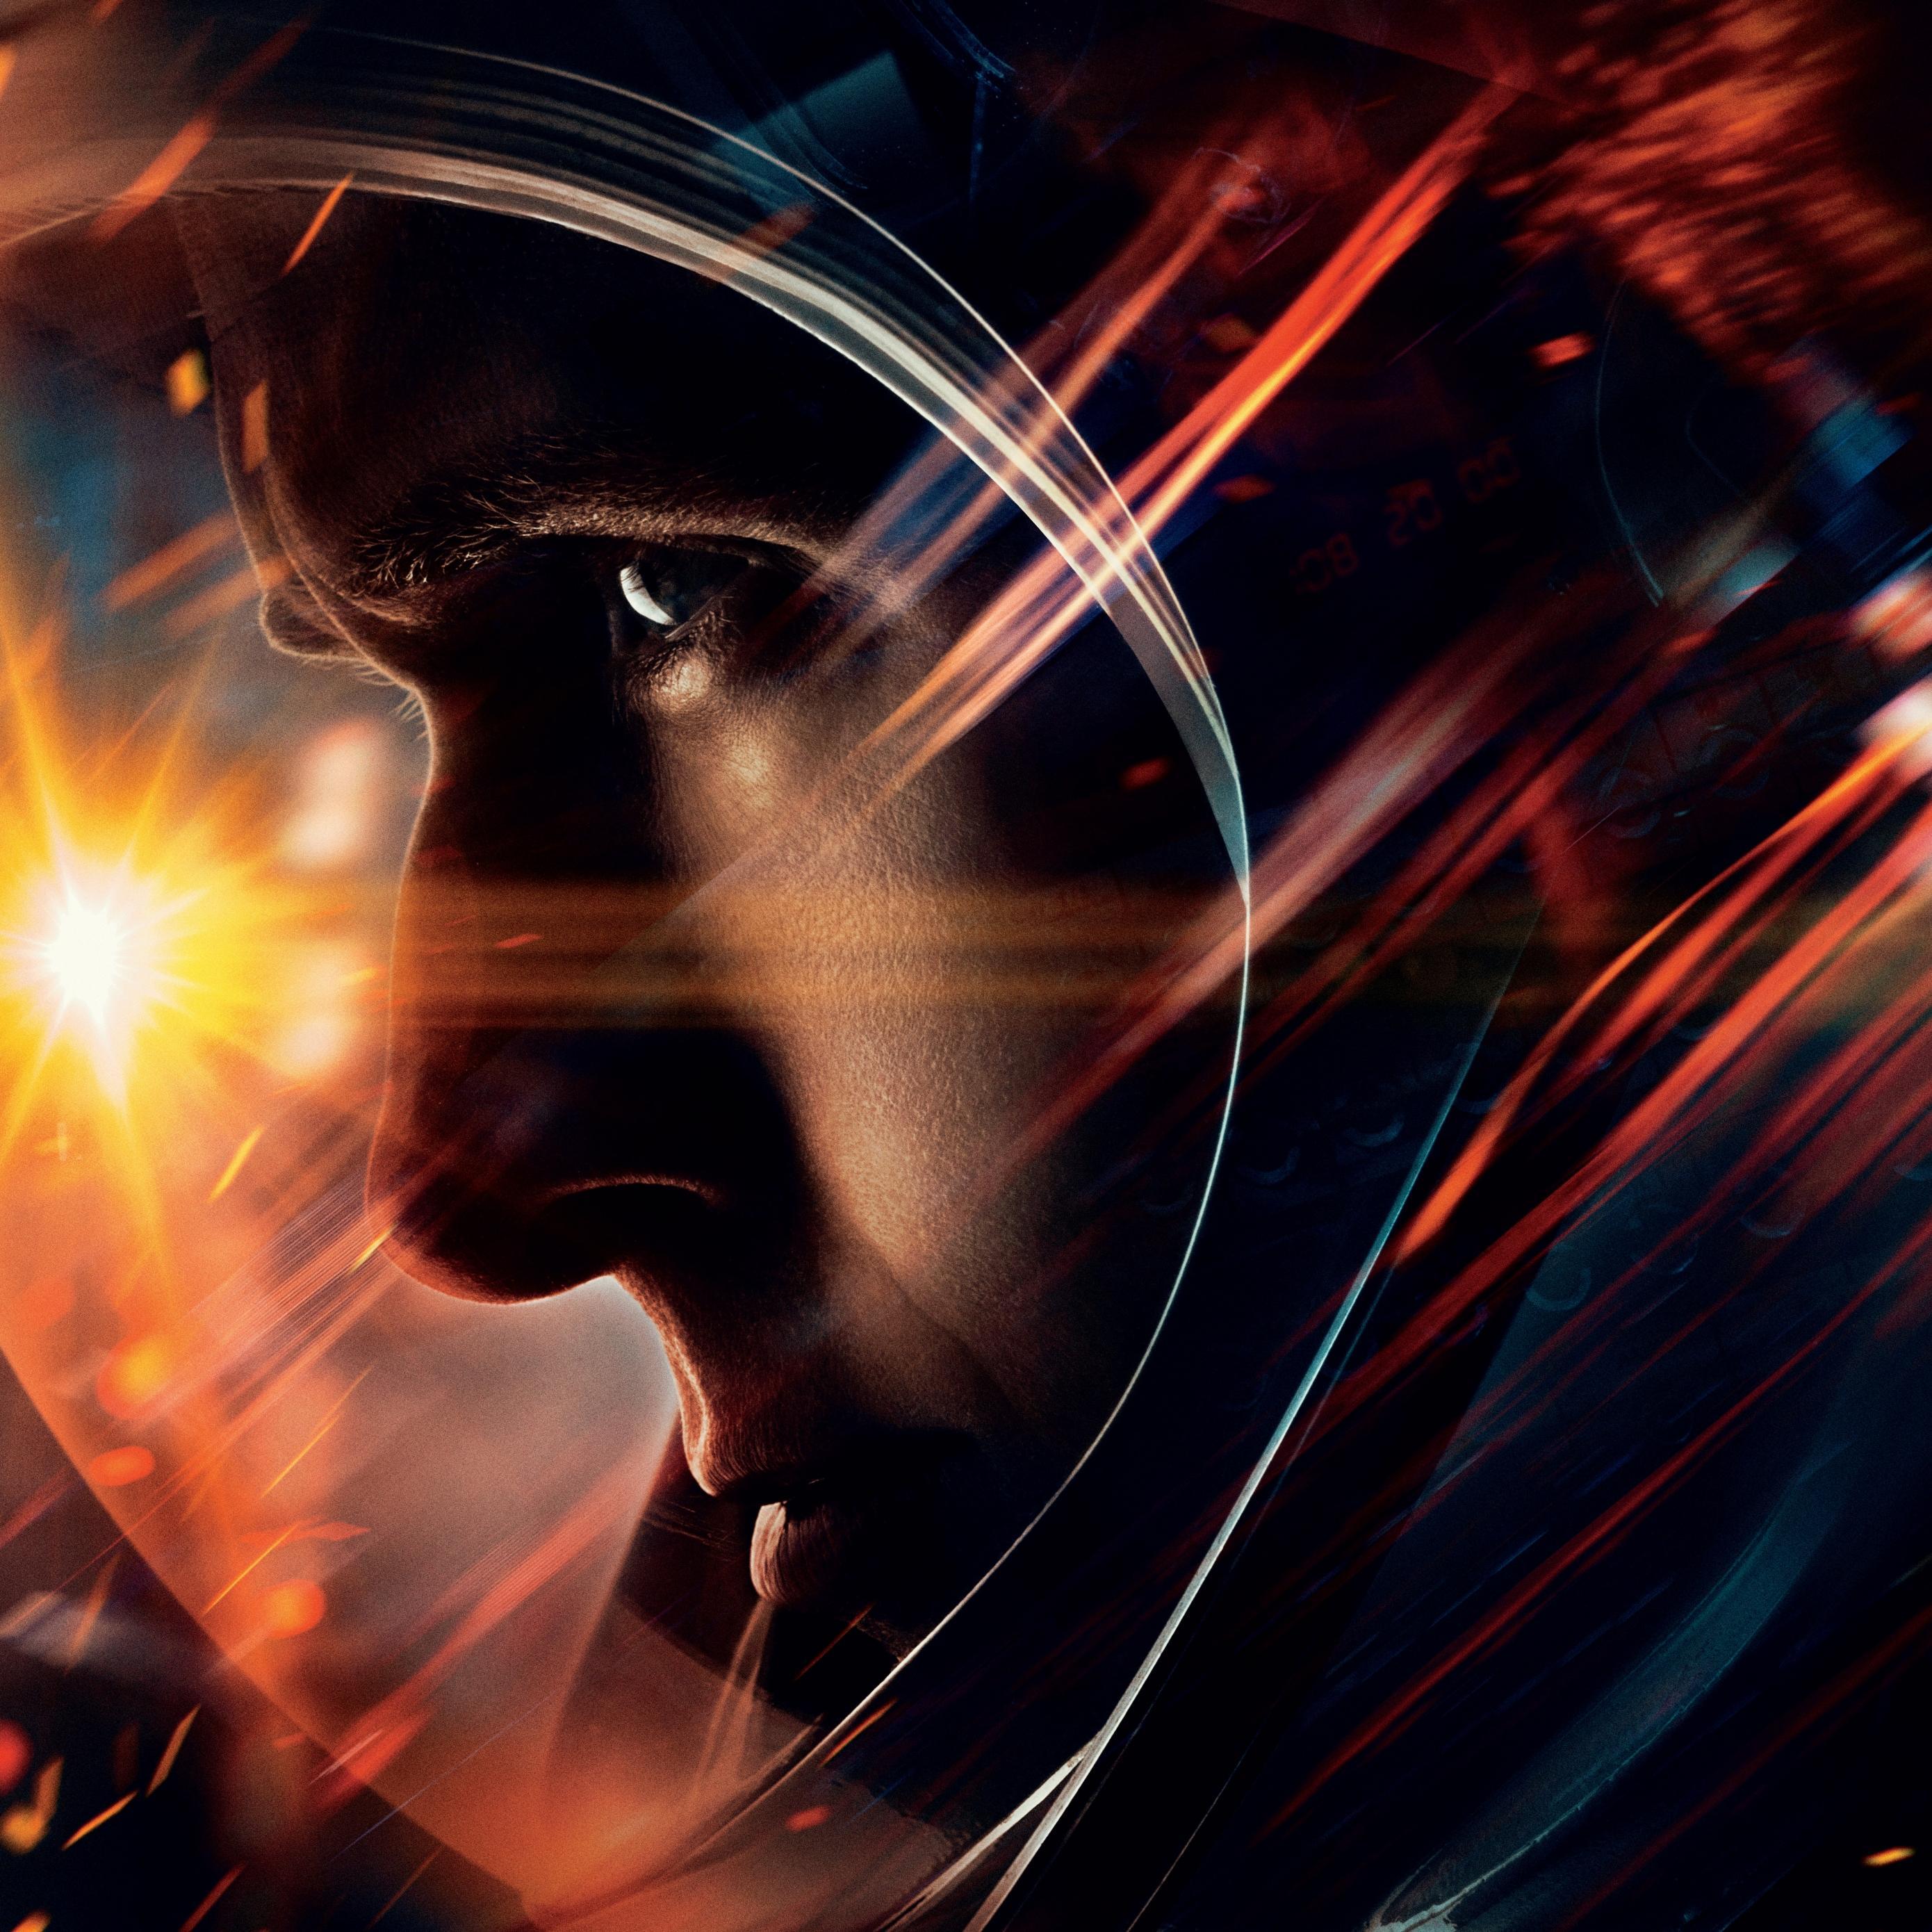 Download First Man 8k Apple iPad Air wallpapers 2780x2780